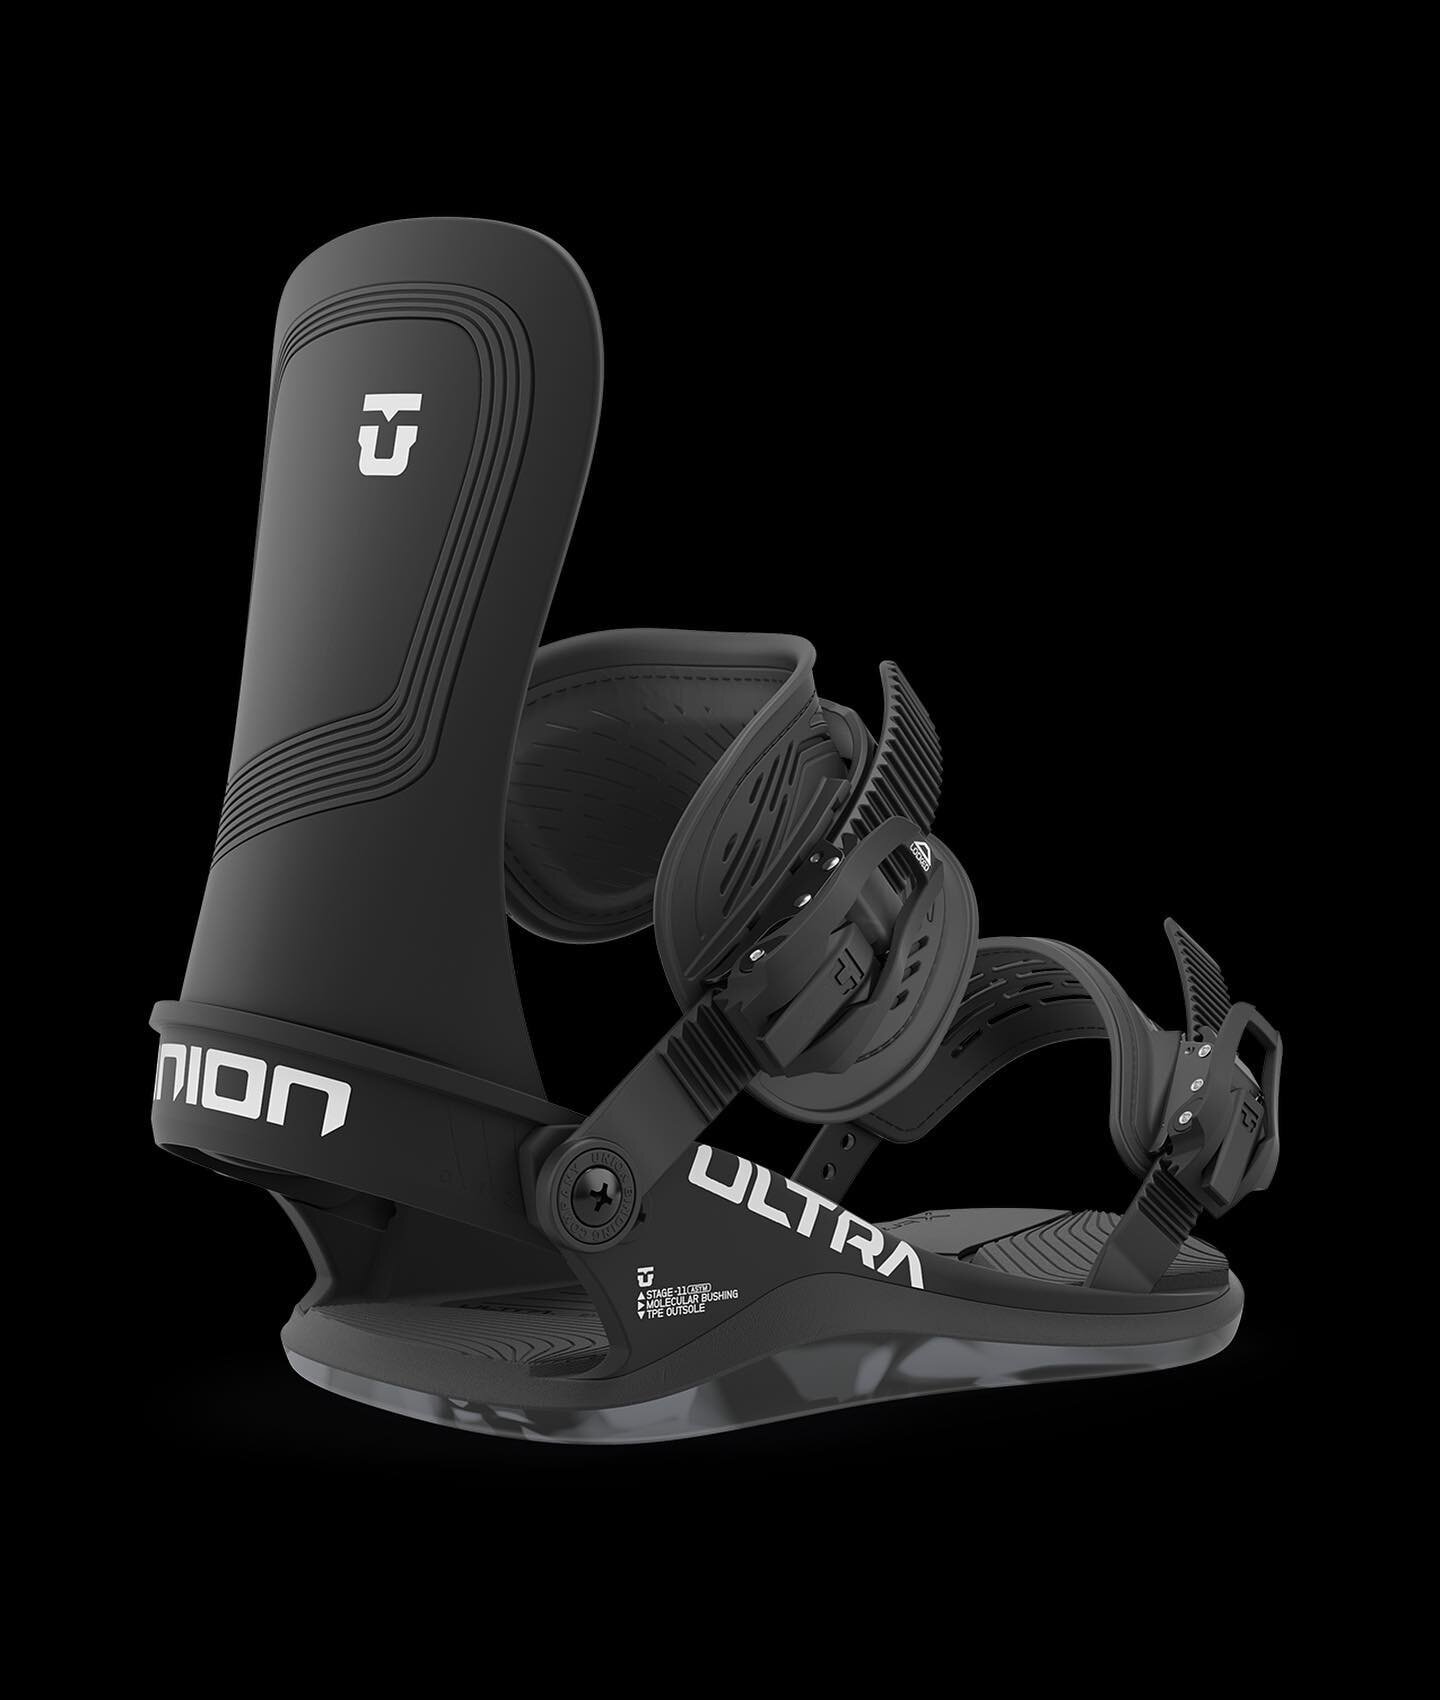 Are you looking for the perfect park/freestyle oriented binding that&rsquo;s soft and forgiving but also provides crazy support as well as dampening? If this sounds like you, we highly recommend the Ultra and it&rsquo;s little brother the Strata from